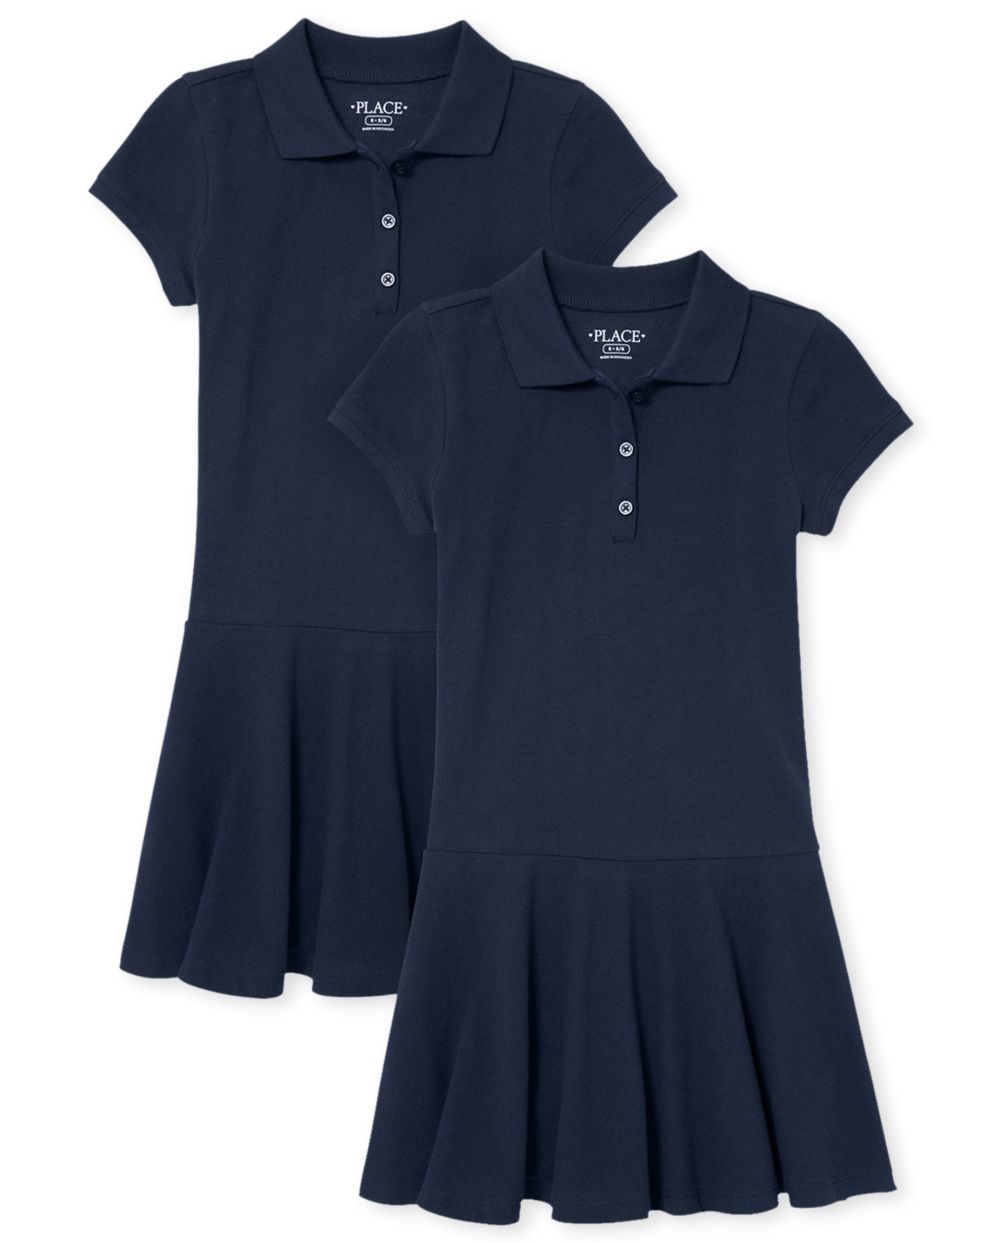 Girls Short Sleeves Sleeves Collared Above the Knee Dress